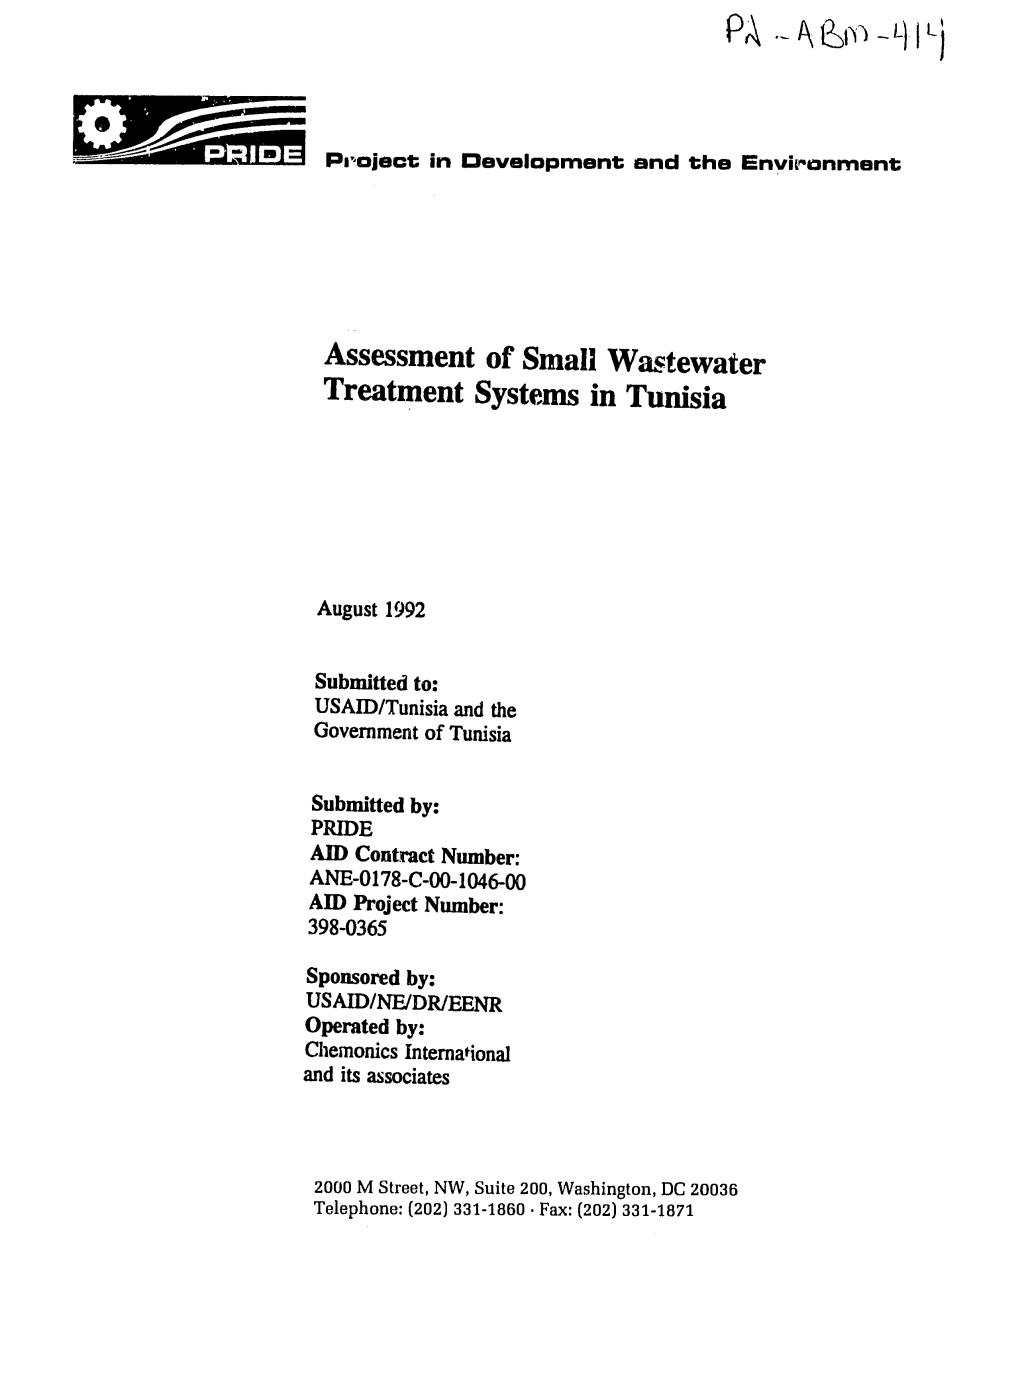 Assessment of Small Wastewater Treatment Systems in Tunisia